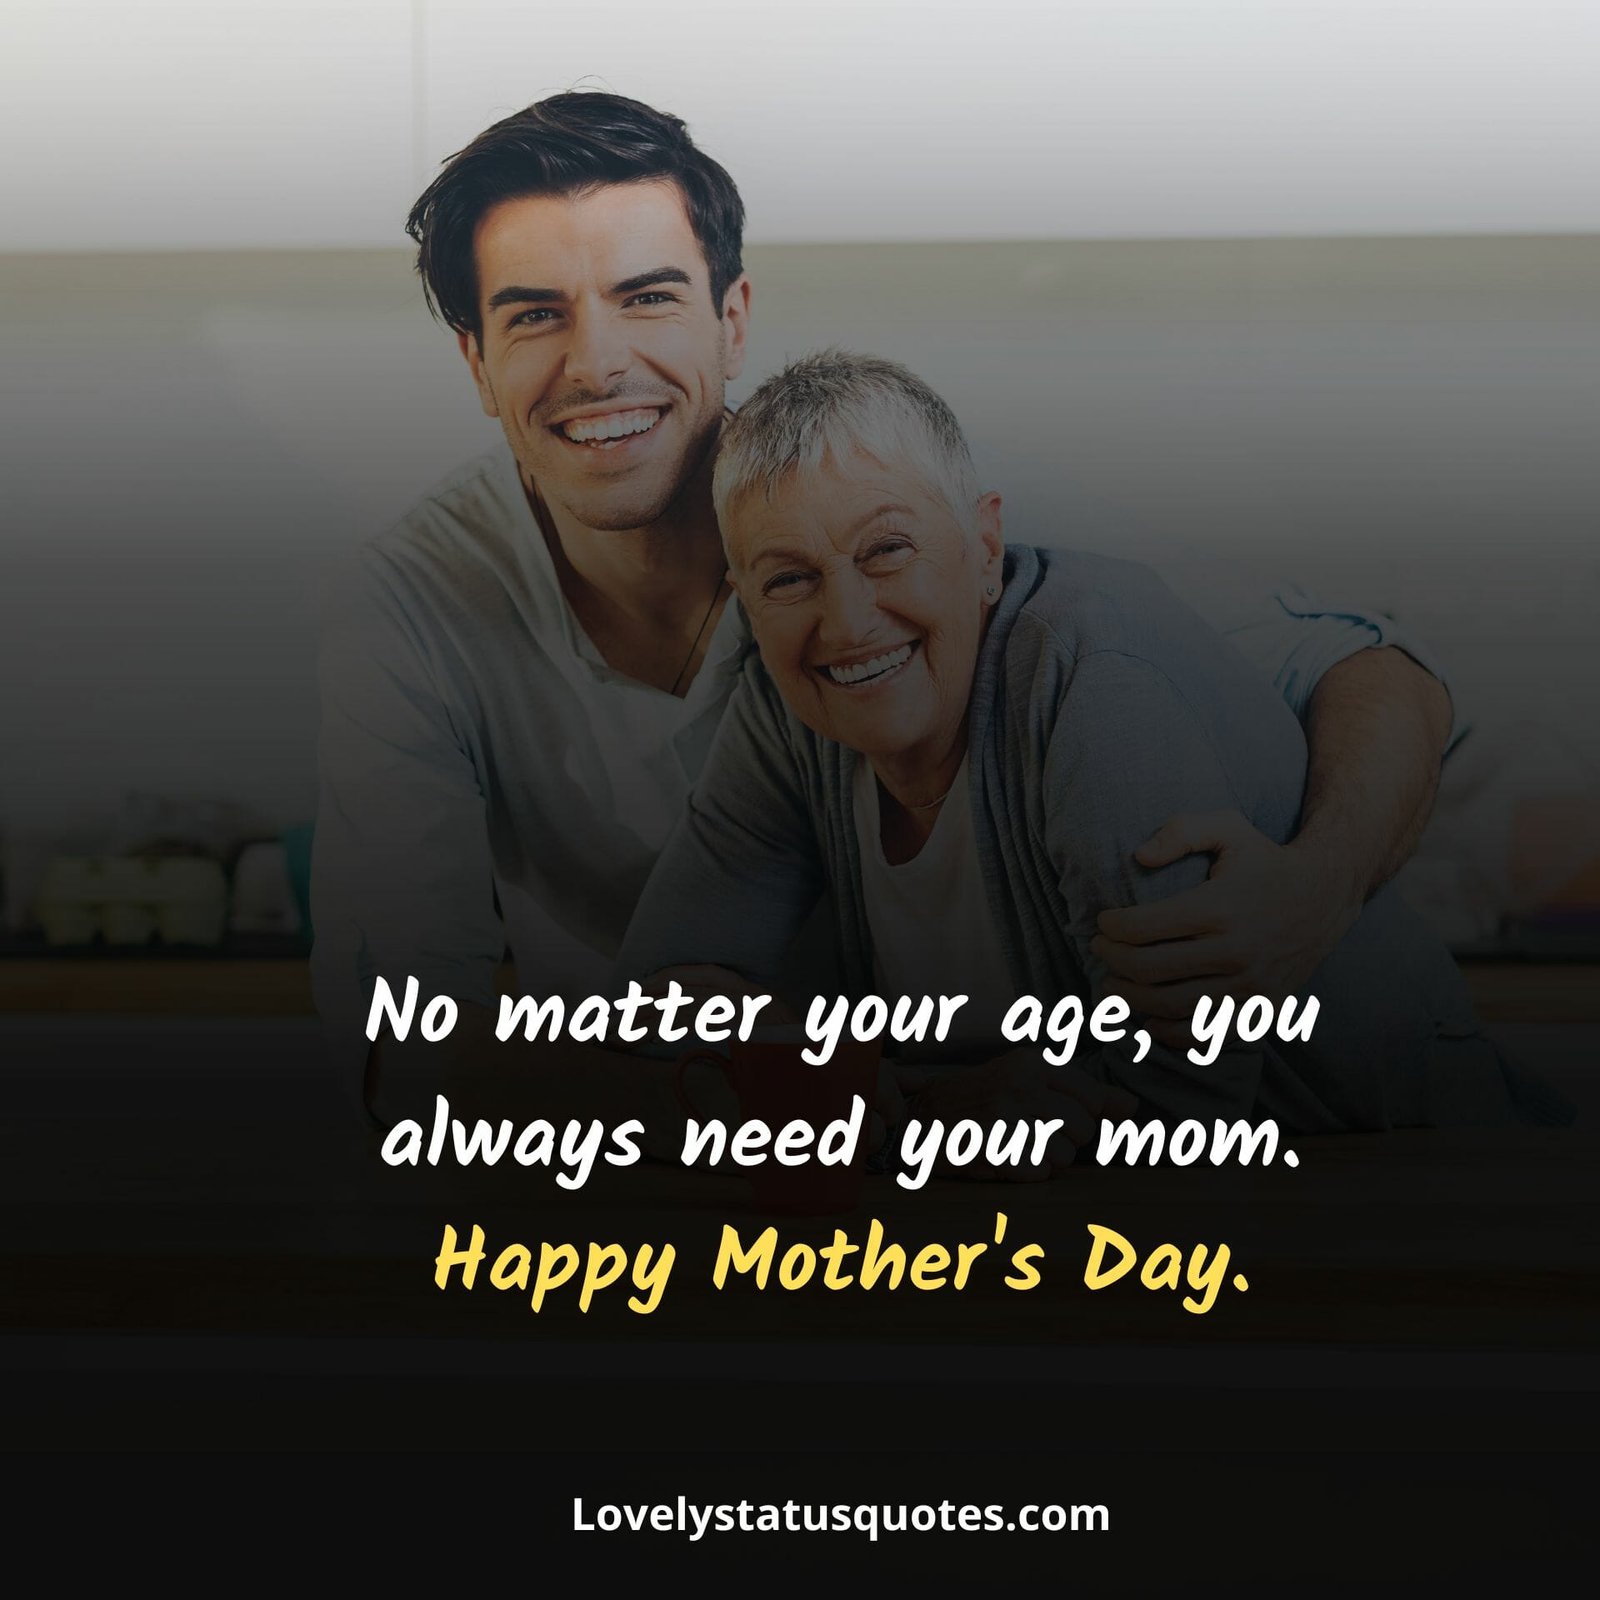 special mother's day wishes to mom